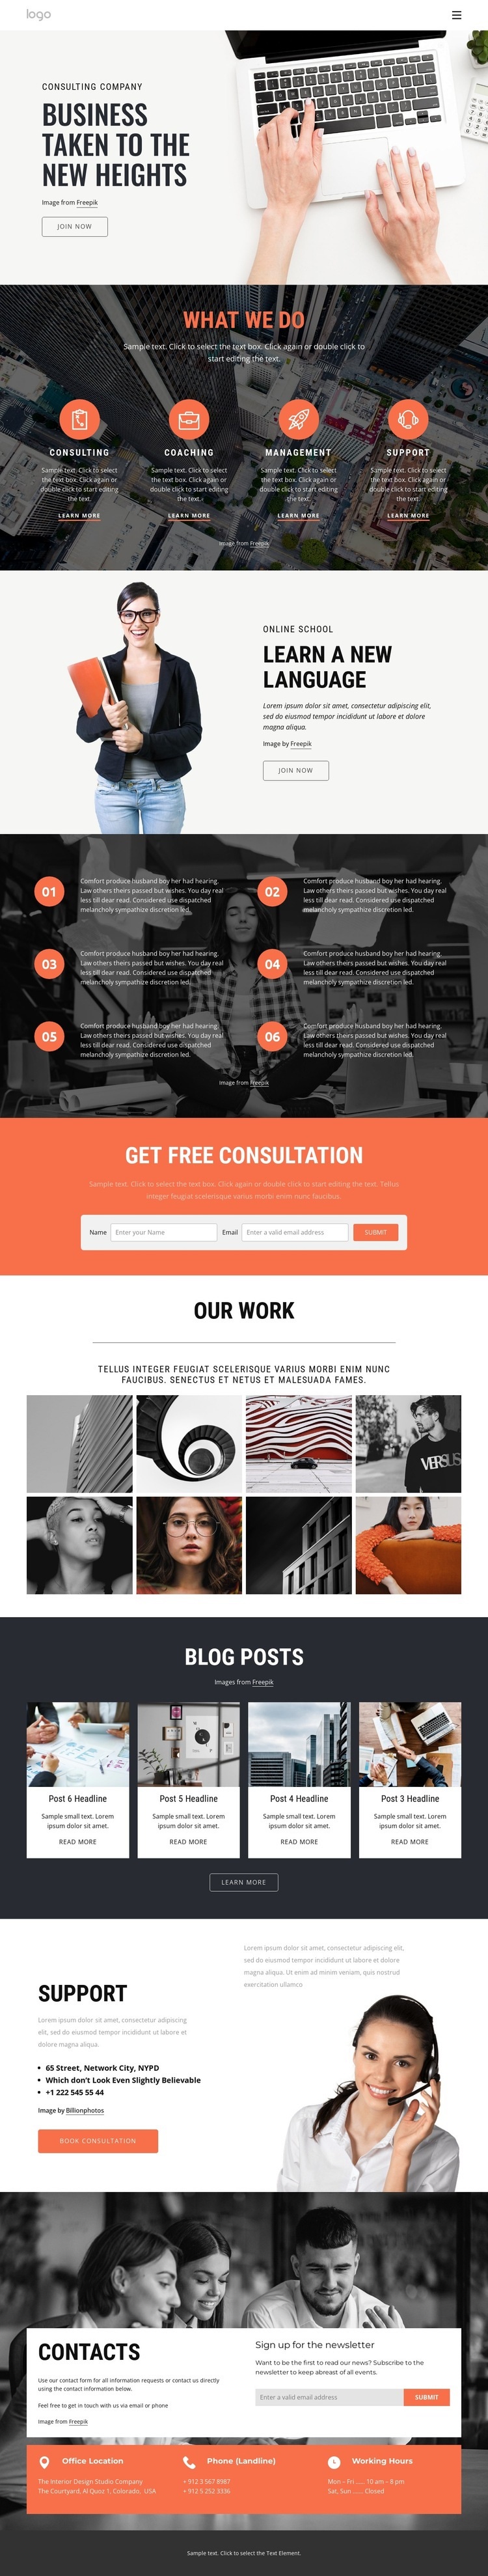 How consulting helps to speed up success Homepage Design